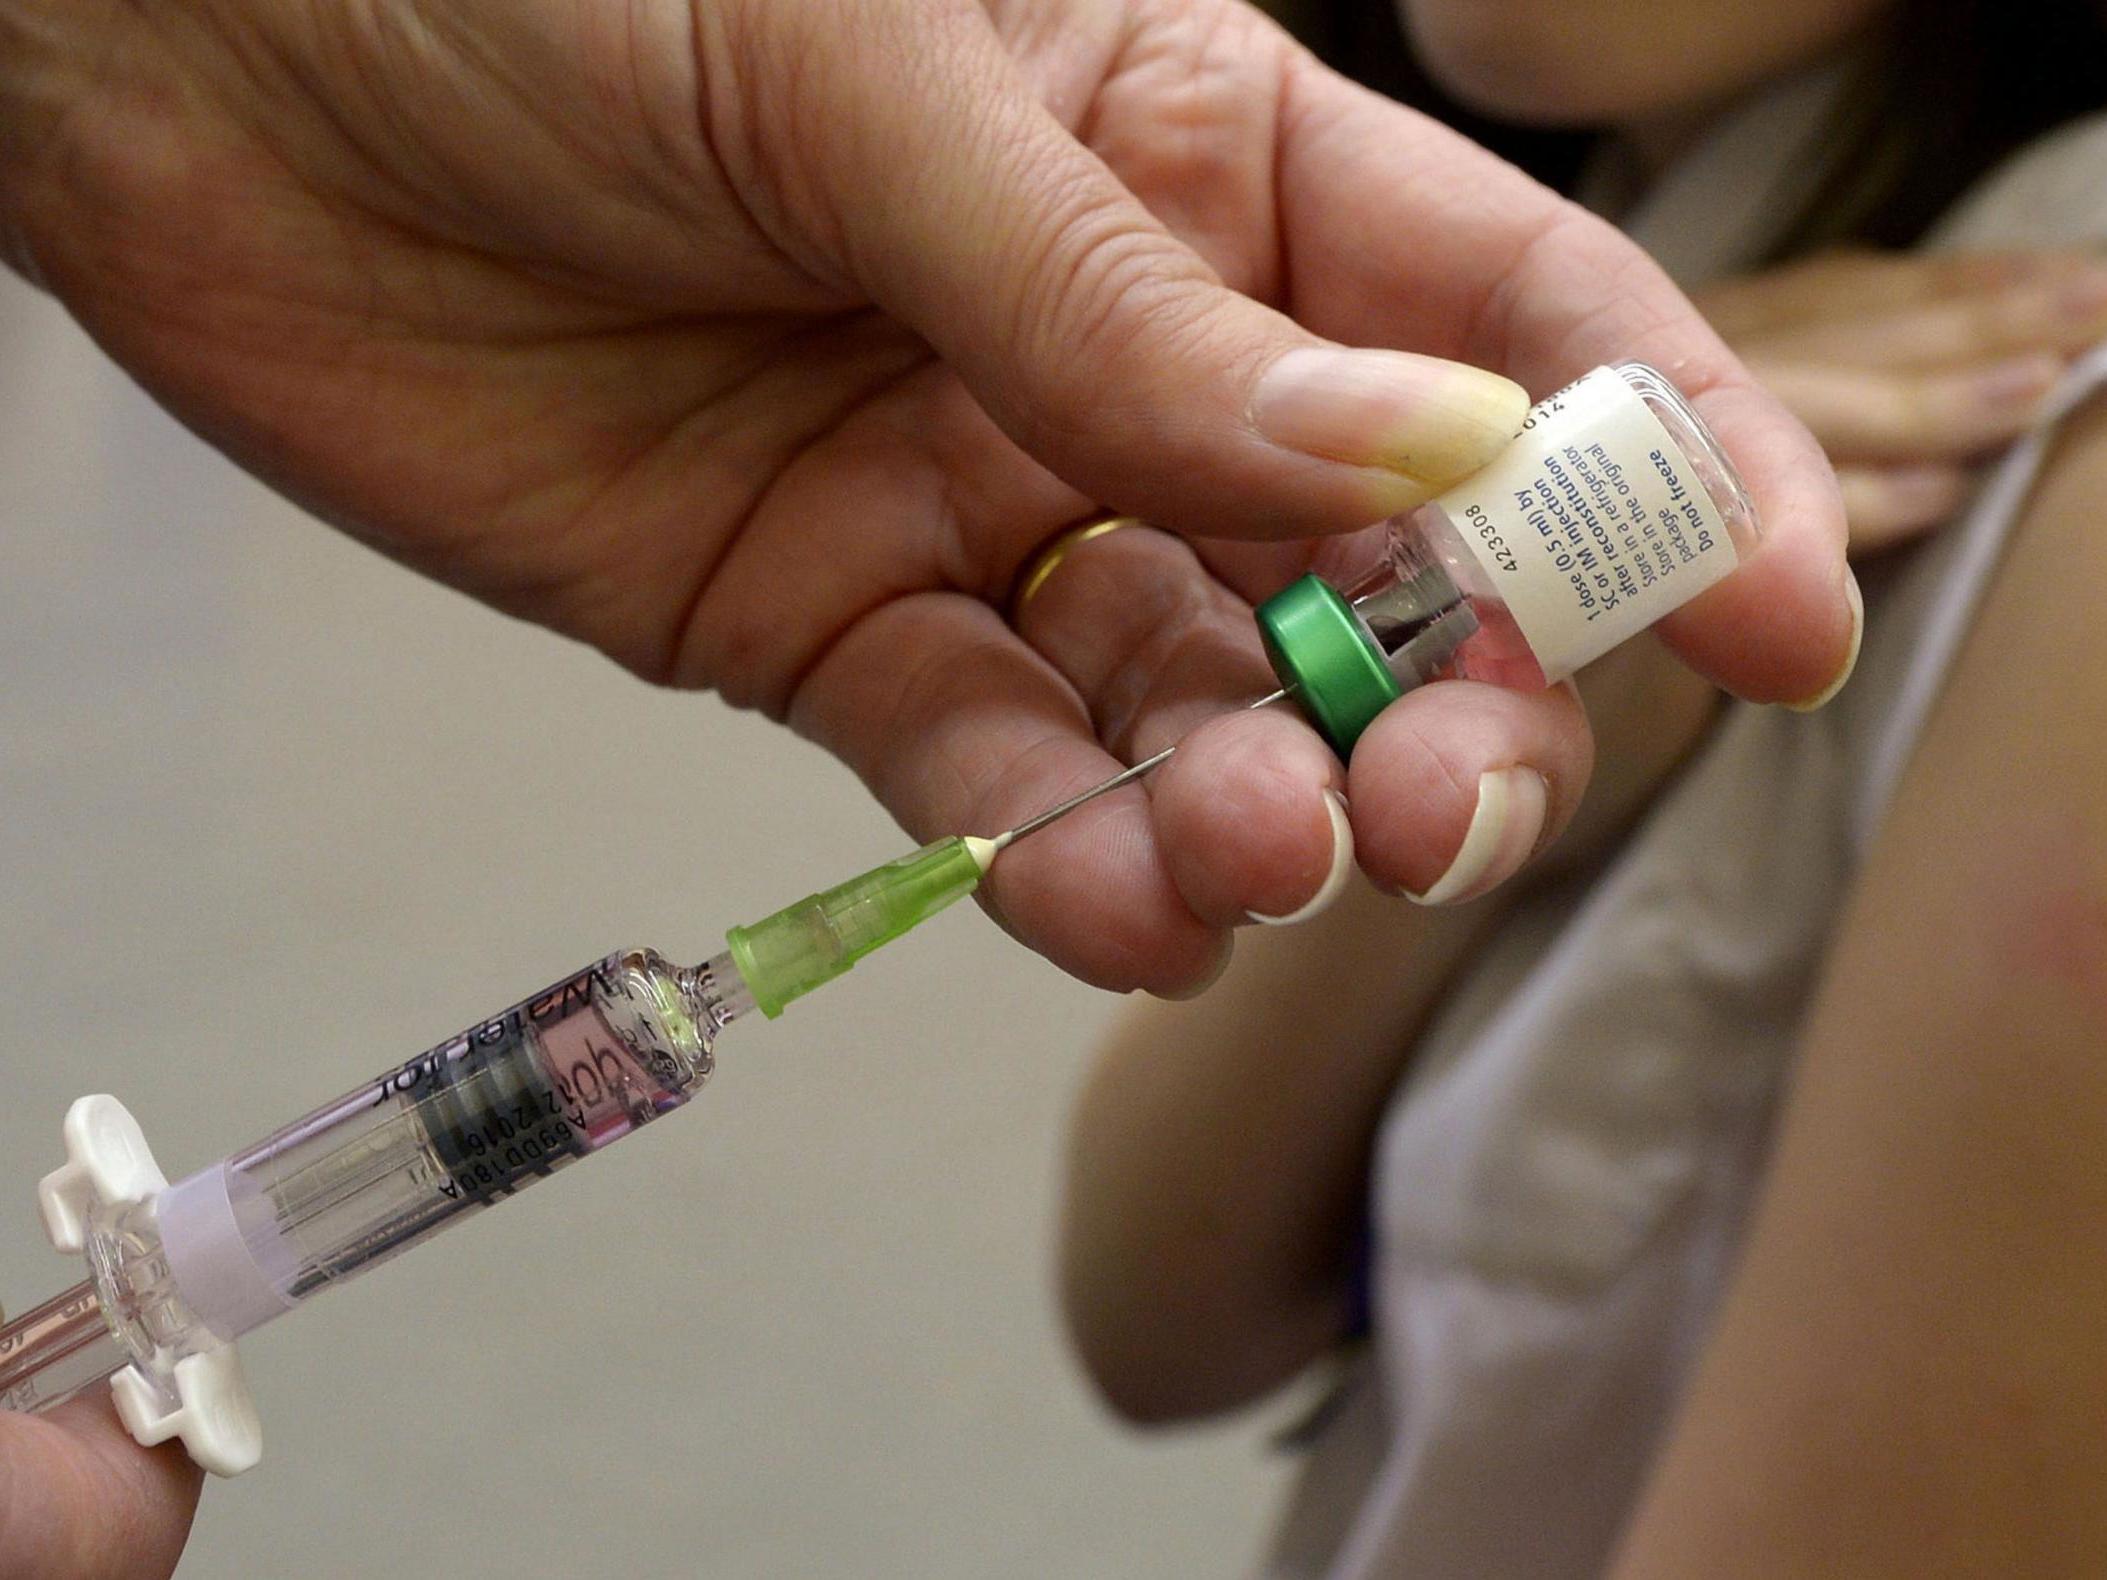 ‘Even one child missing their vaccine is one too many,’ says Public Health England